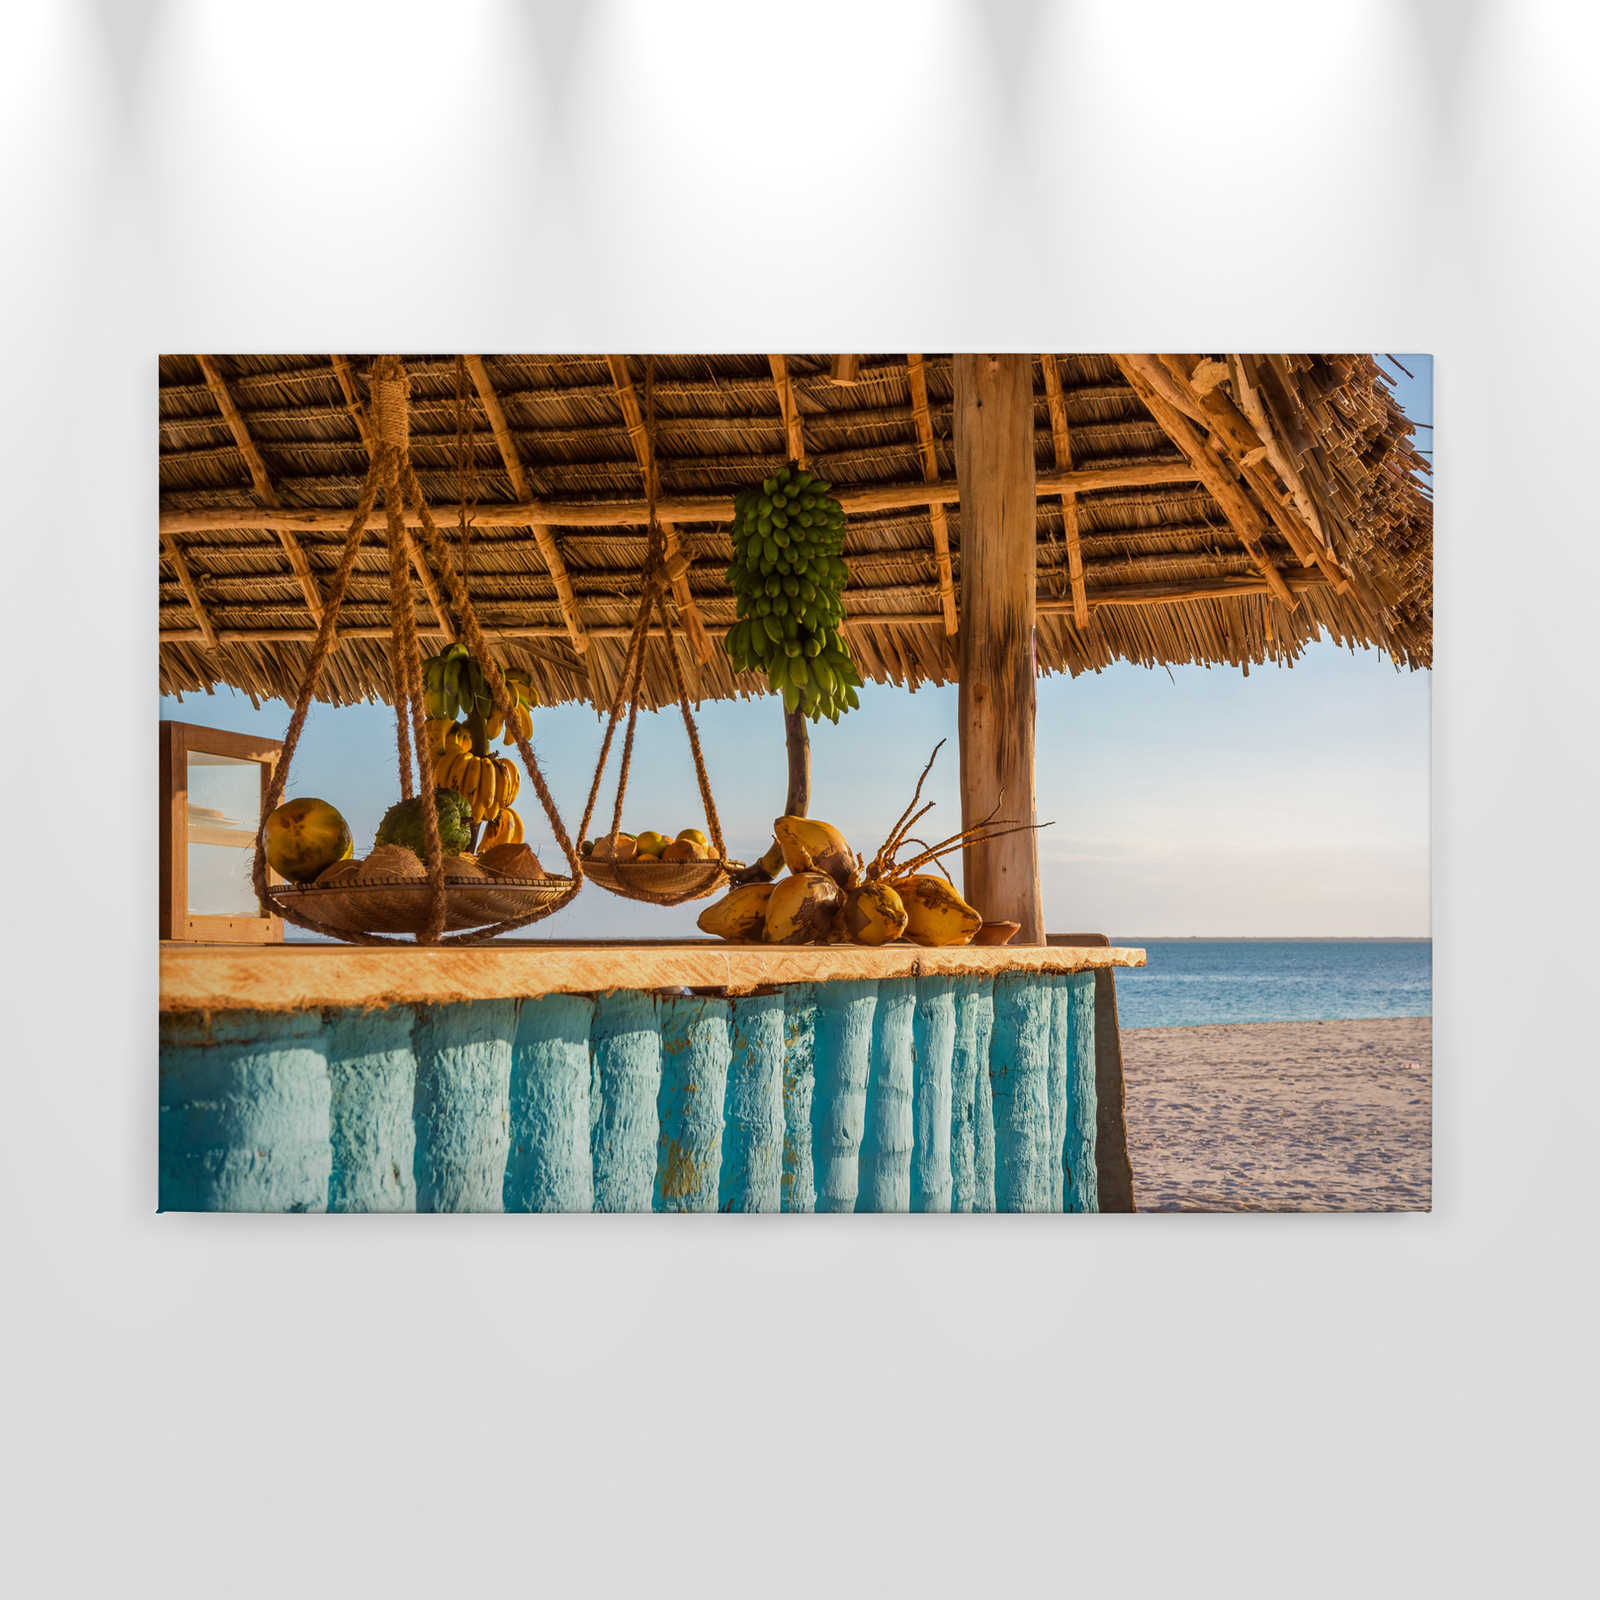             Canvas with stand bar and sea view - 0.90 m x 0.60 m
        